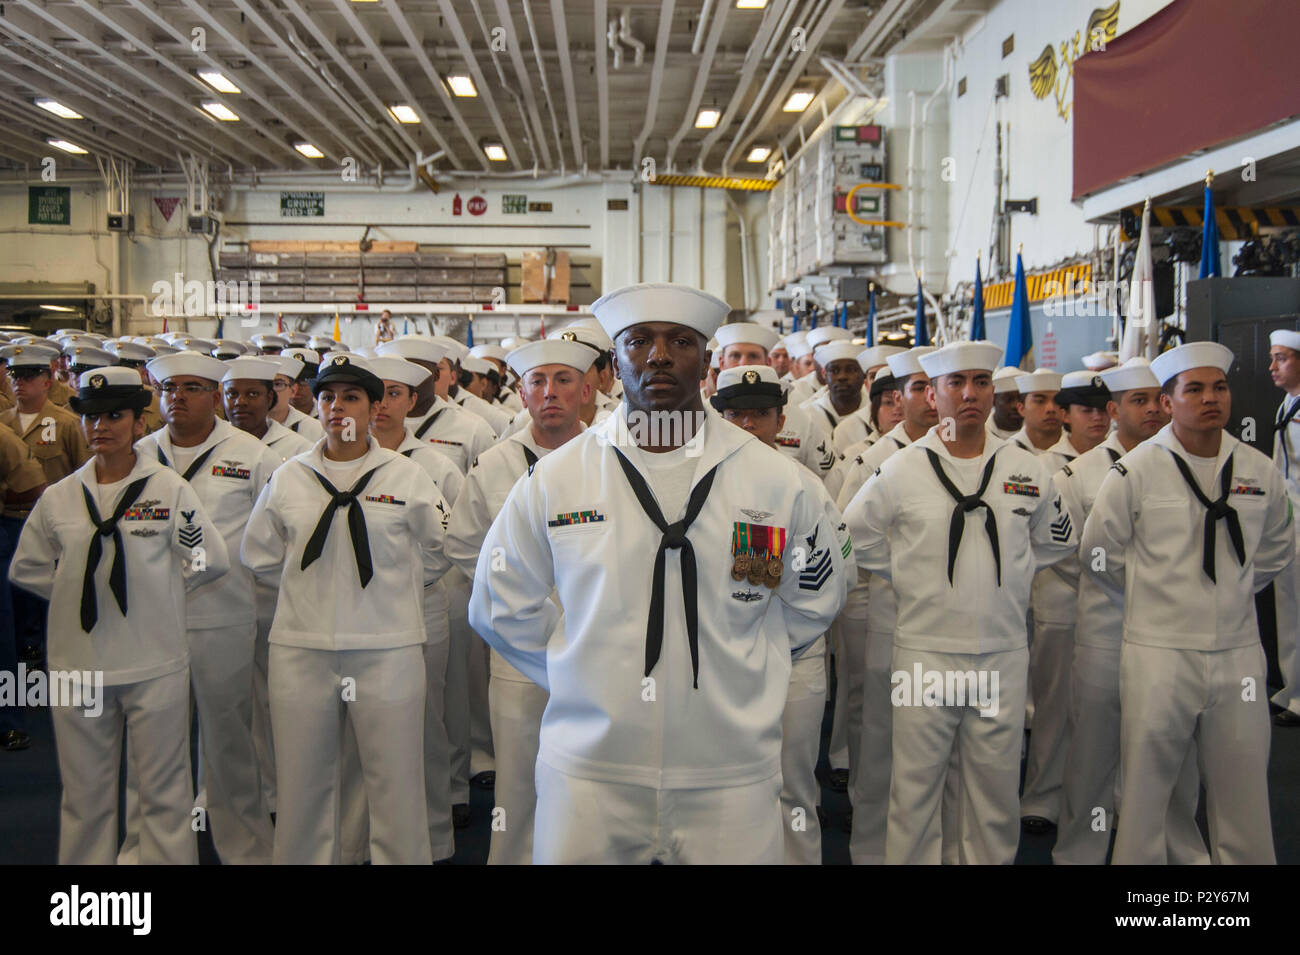 160804-N-EW322-033 SAN DIEGO (Aug. 4, 2016) – Aviation Structural Mechanic 1st Class Jamaan Fripp, from Beaufort, South Carolina, stands in formation with fellow USS Makin Island (LHD 8) Sailors during a change of command ceremony in the ship’s hangar bay. Capt. Mark Melson relieved Capt. Jon P. Rodgers during the ceremony. The amphibious assault ship is homeported in San Diego. (U.S. Navy photo by Mass Communication Specialist Seaman Clark D. Lane/Released) Stock Photo